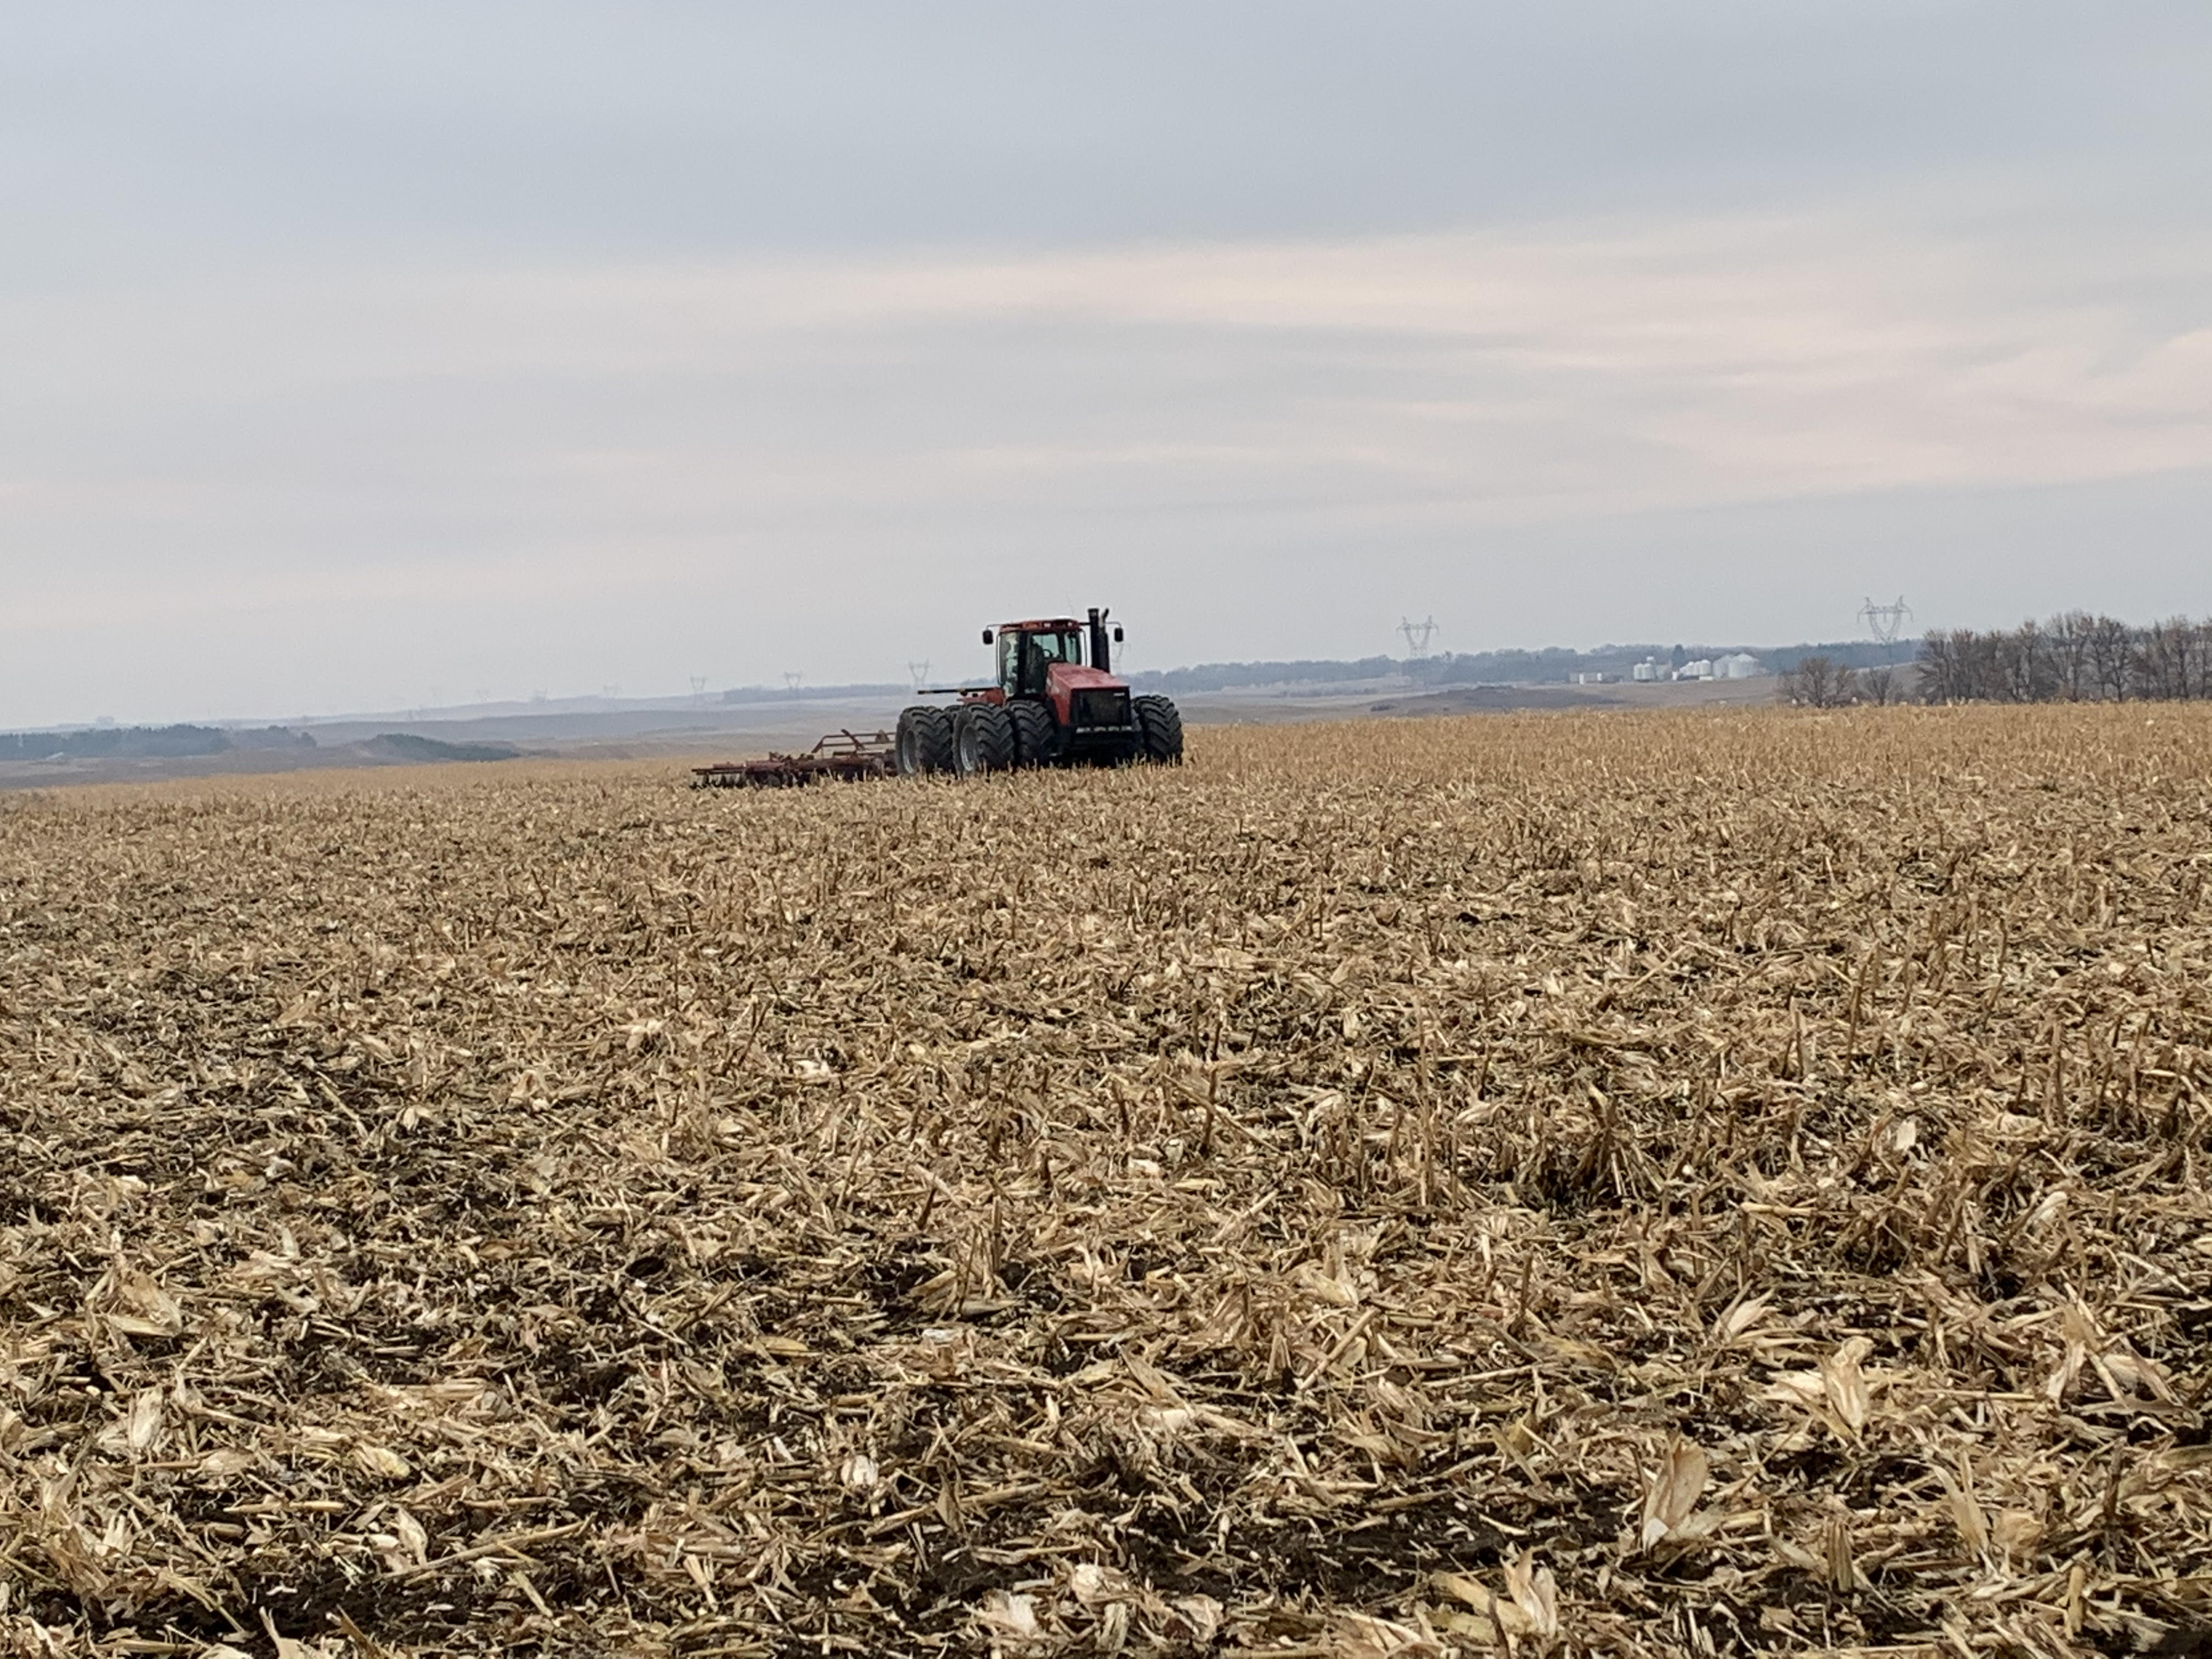 Morning Ag News, November 12, 2021: Farmers working on field work before freeze up